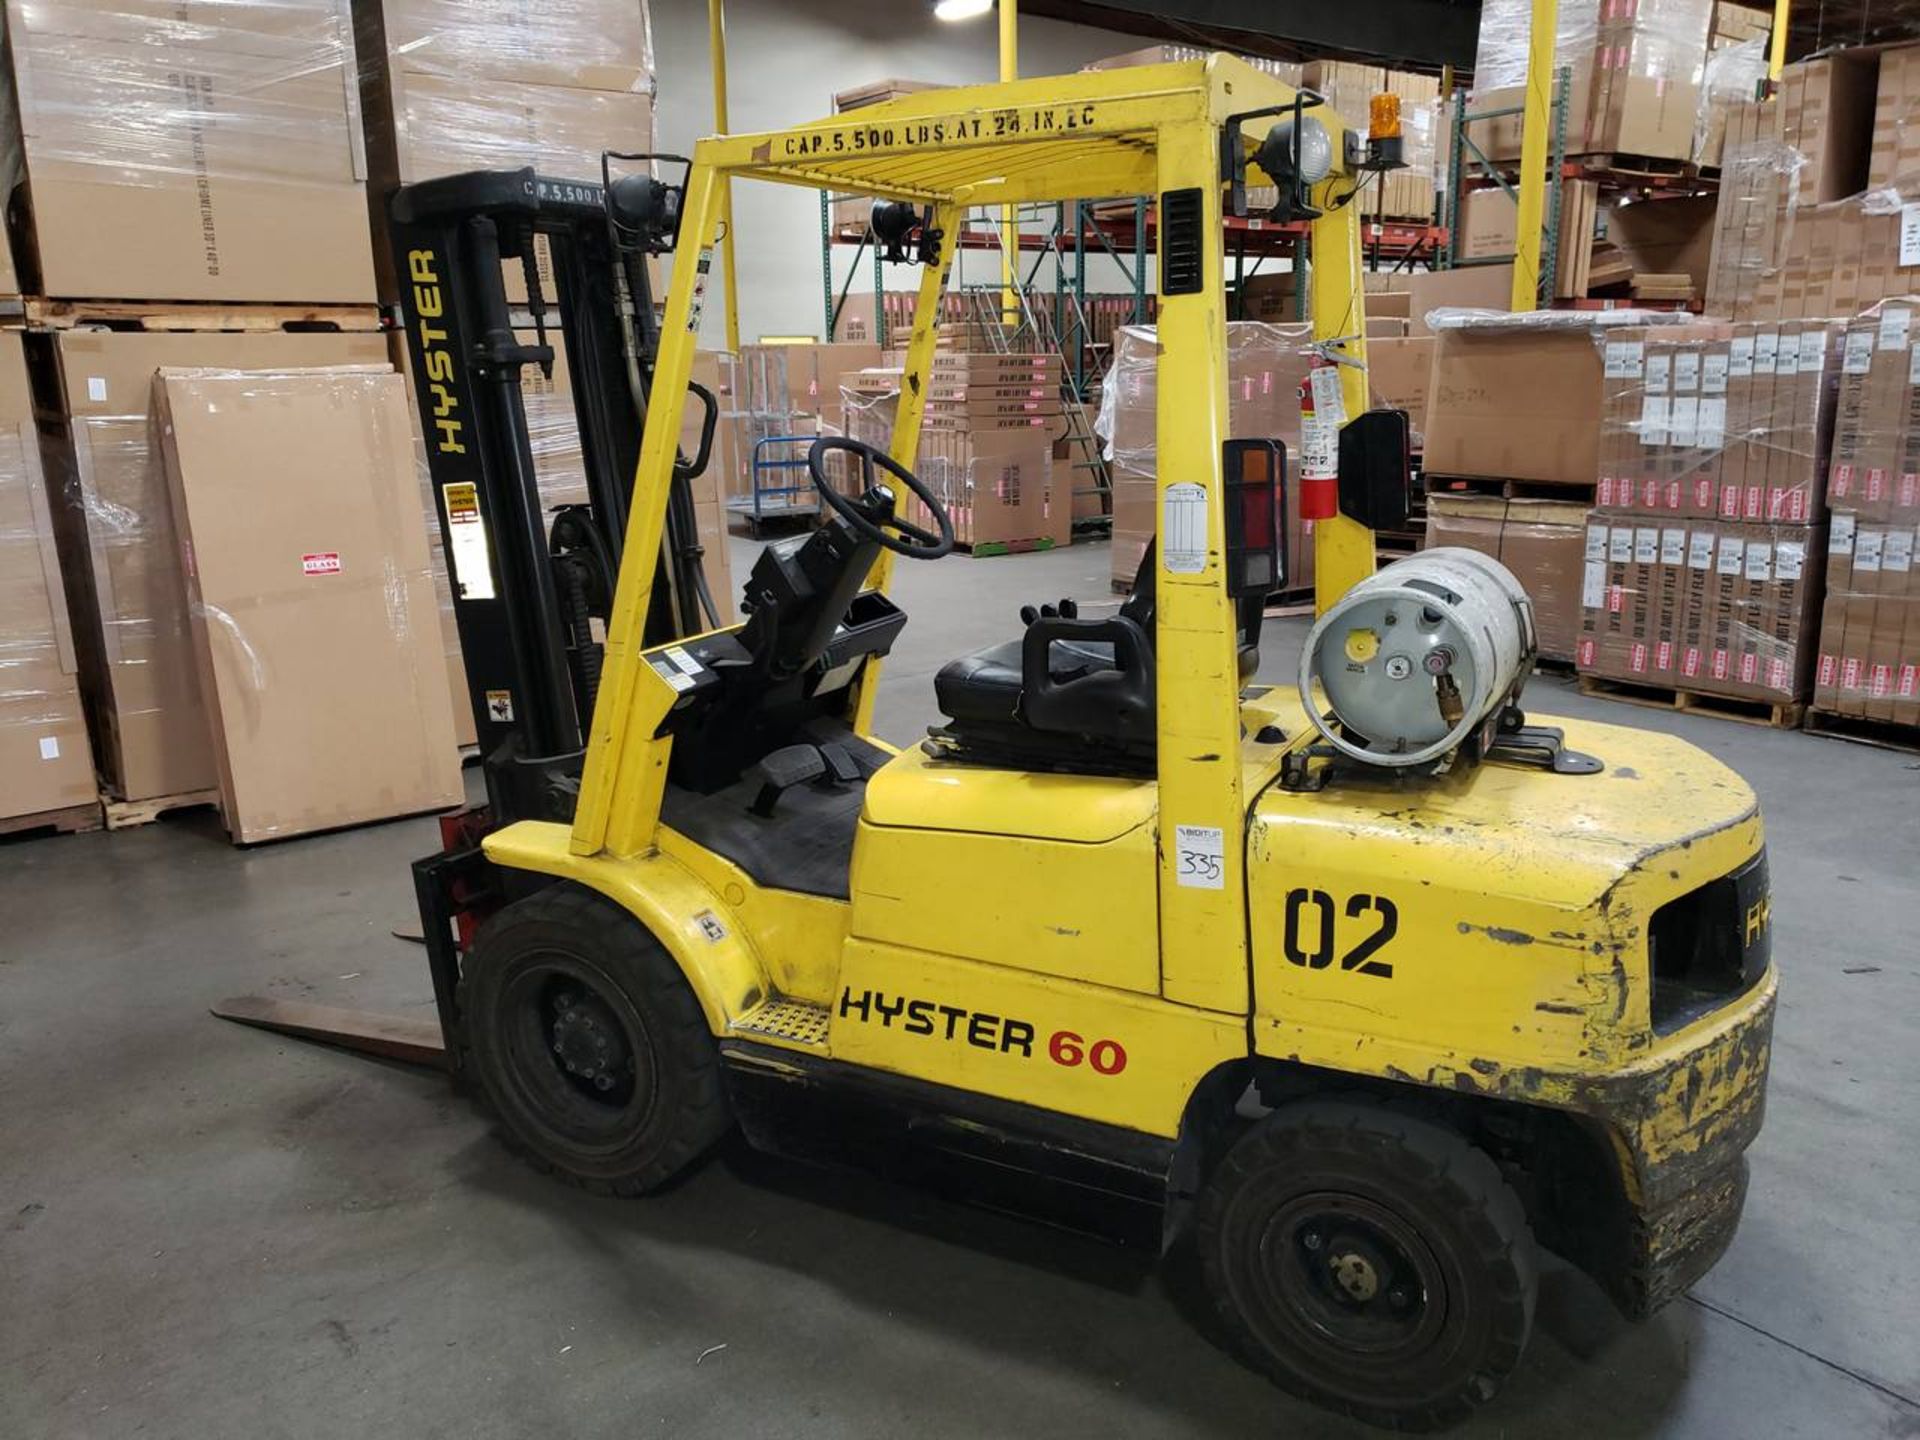 2003 Hyster H60XM 4Cyl., LPG Forklift, W/ Sideshift & Scale 6000Lb Capacity, 1442.7 Hrs, 42" Forks - Image 2 of 12